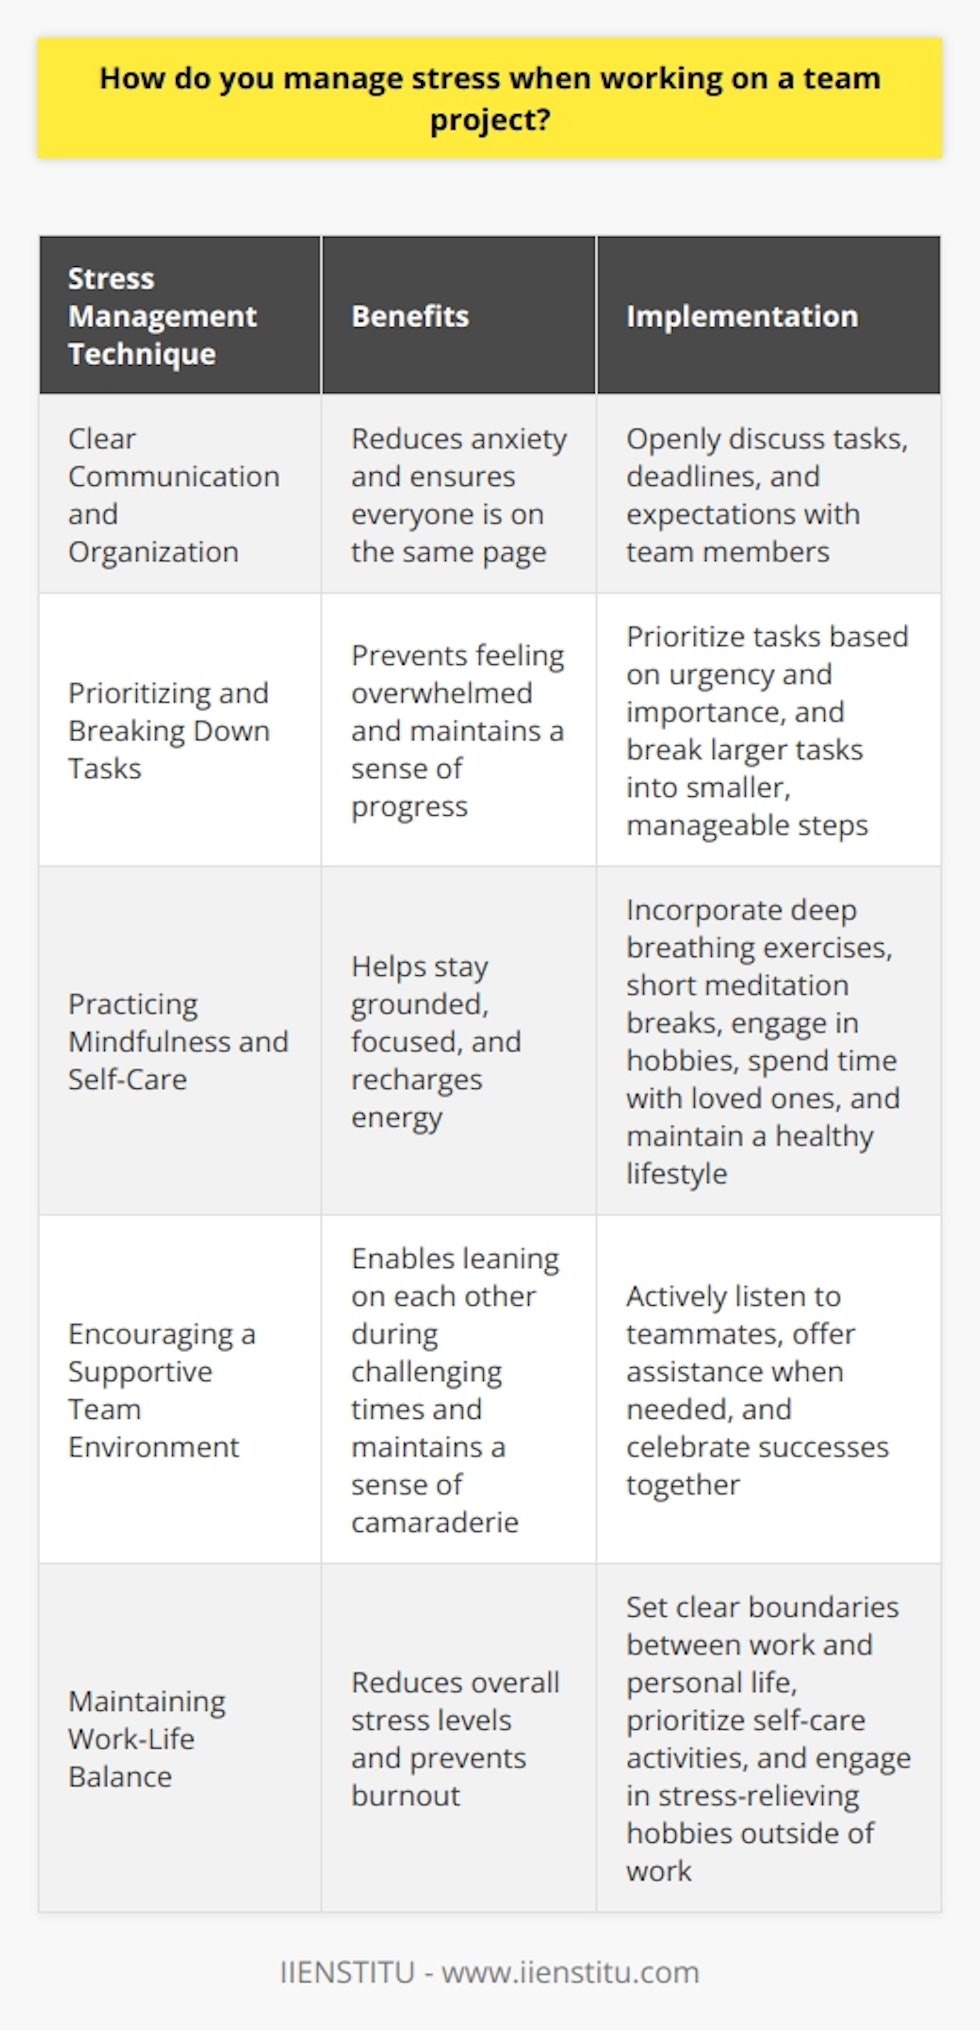 When working on a team project, I manage stress by focusing on clear communication and organization. I believe that openly discussing tasks, deadlines, and expectations with team members is crucial for reducing anxiety and ensuring everyone is on the same page. Prioritizing and Breaking Down Tasks To prevent feeling overwhelmed, I prioritize tasks based on urgency and importance. I break larger tasks into smaller, manageable steps, making the project feel less daunting. This approach allows me to tackle one thing at a time and maintain a sense of progress. Practicing Mindfulness and Self-Care I find that incorporating mindfulness techniques, such as deep breathing exercises and short meditation breaks, helps me stay grounded and focused. When stress levels rise, I take a few minutes to recenter myself, which enables me to approach challenges with a clearer mind. Additionally, I prioritize self-care outside of work by engaging in hobbies, spending time with loved ones, and maintaining a healthy lifestyle. These activities help me recharge and manage stress more effectively. Encouraging a Supportive Team Environment I believe that fostering a supportive and collaborative team environment is essential for managing stress. I make an effort to actively listen to my teammates, offer assistance when needed, and celebrate our successes together. By creating a positive atmosphere, we can lean on each other during challenging times and maintain a sense of camaraderie. In summary, I manage stress in team projects through clear communication, task prioritization, mindfulness practices, self-care, and contributing to a supportive team dynamic. By implementing these strategies, I am able to remain calm, focused, and productive, even in high-pressure situations.